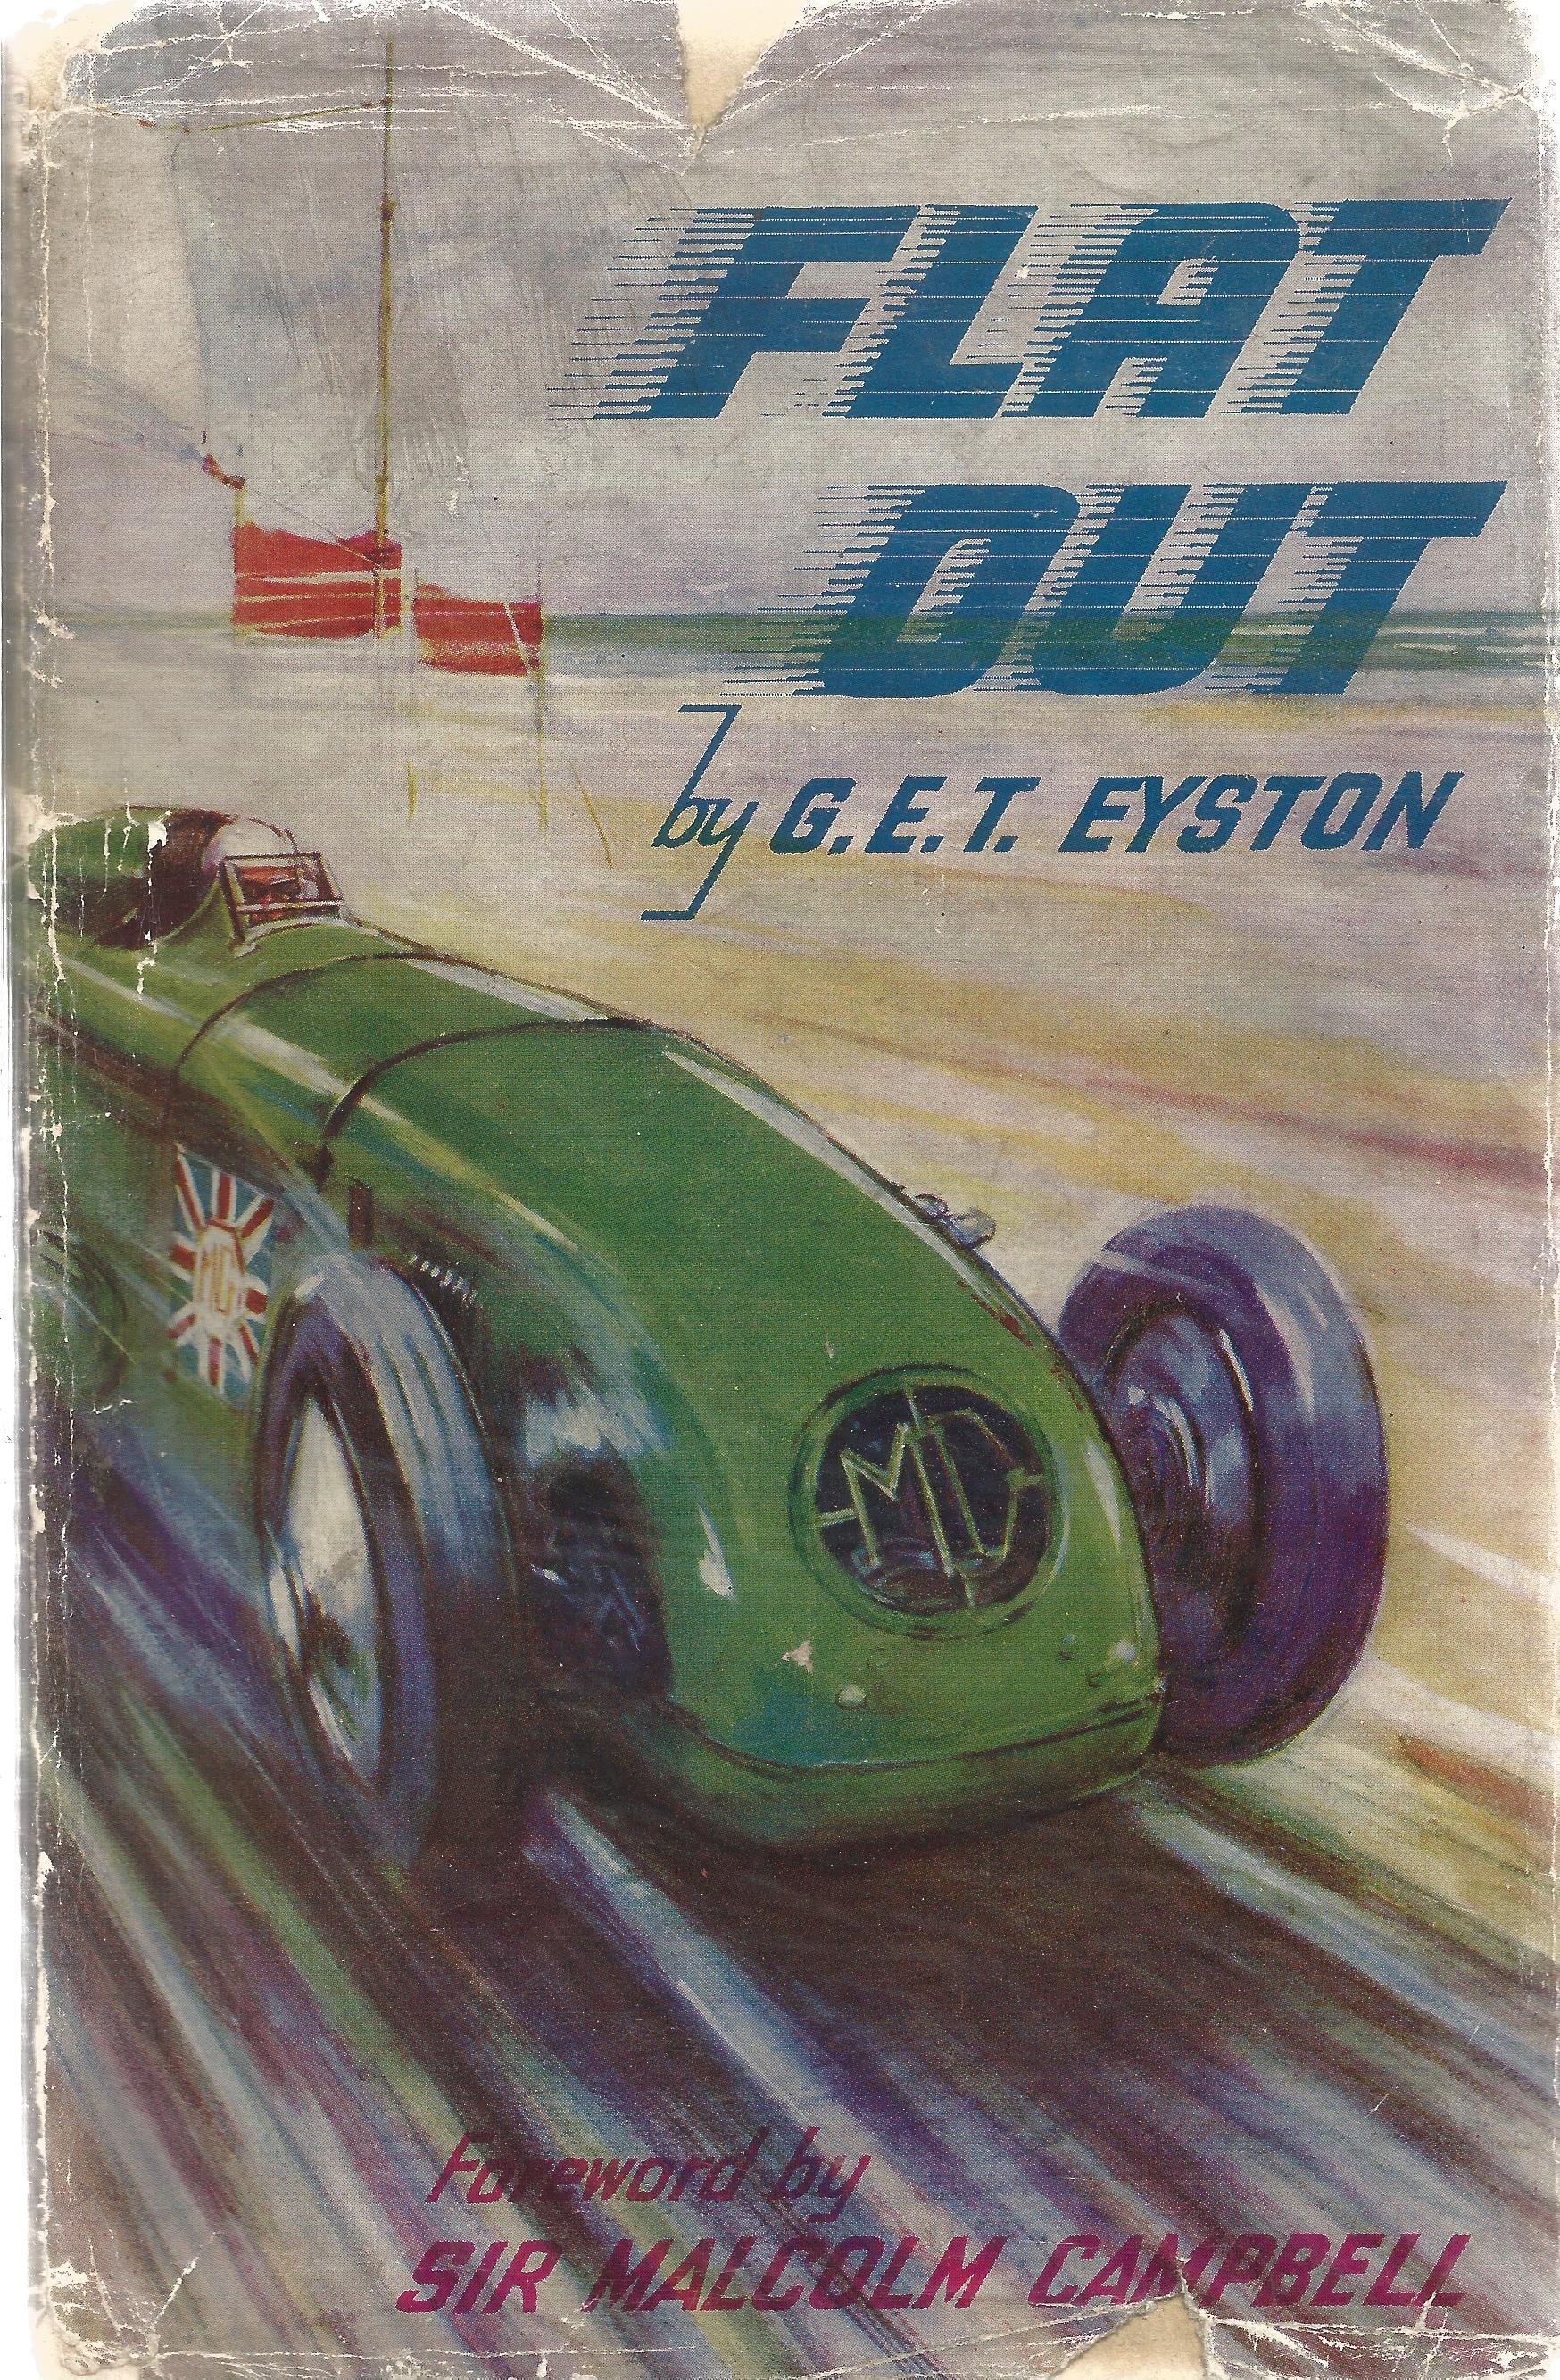 G. E. T. Eyston hardback book Flat Out 1933 published by John Miles Publisher Ltd some age related